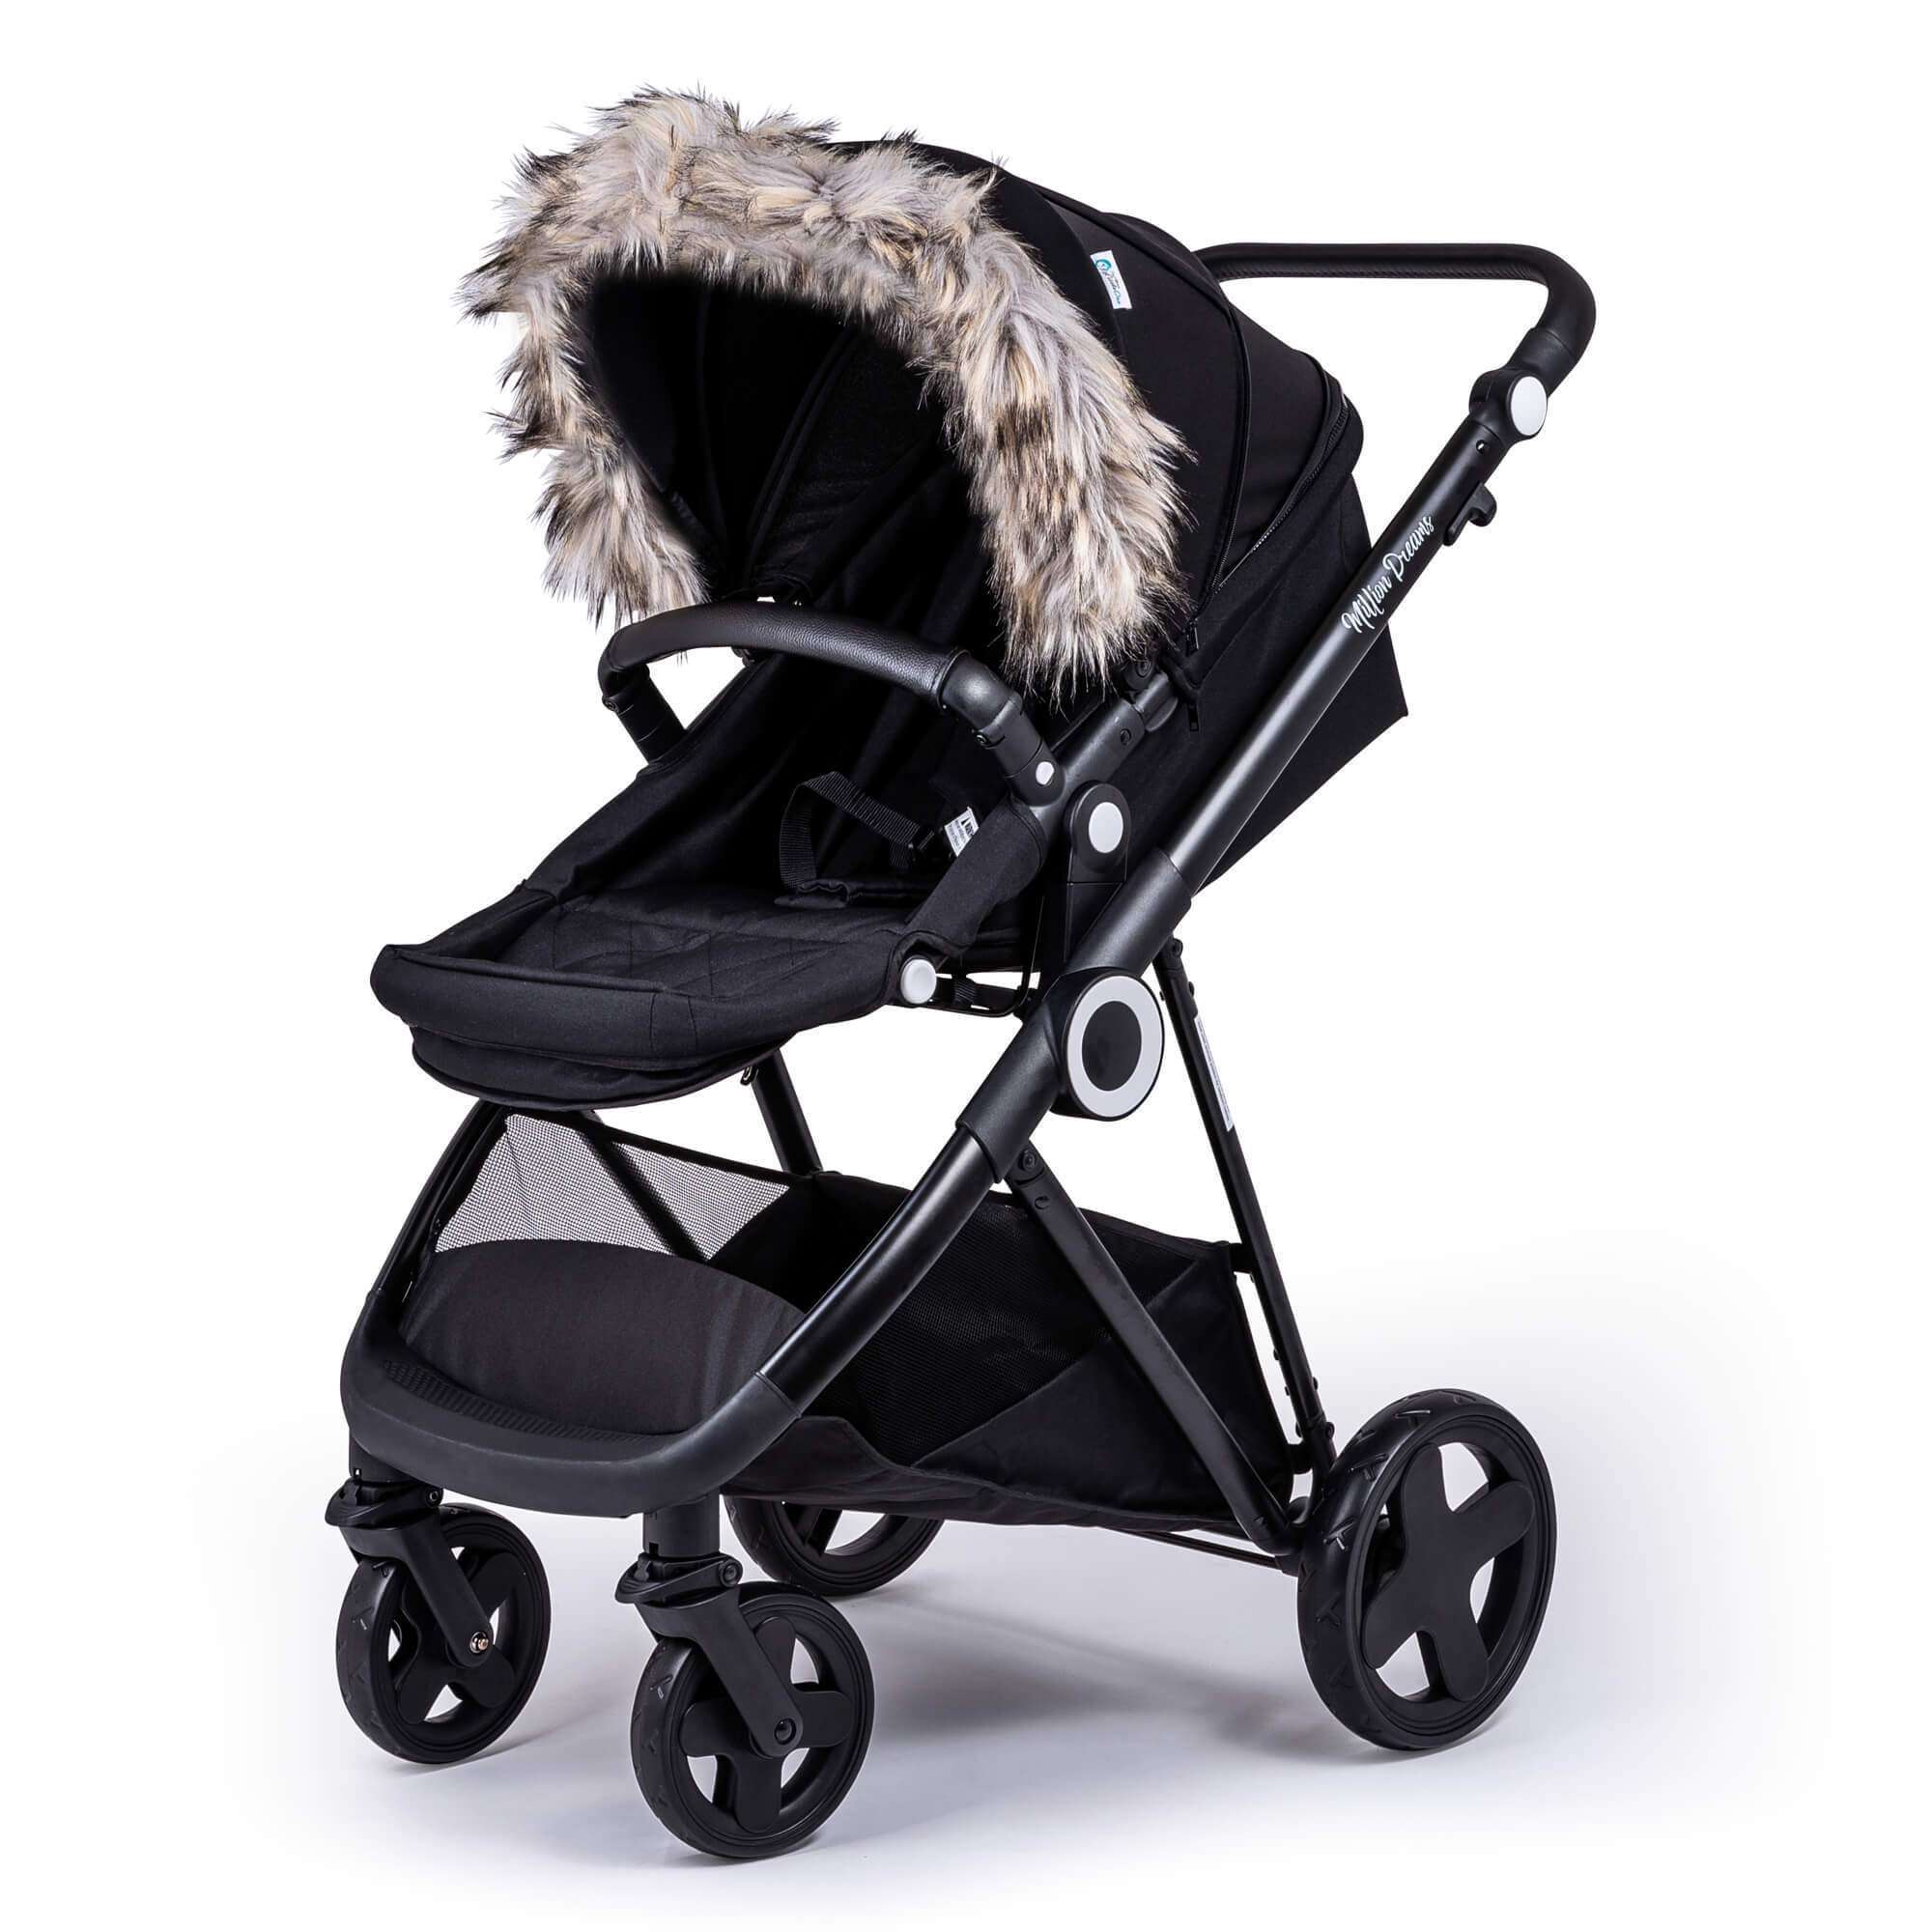 Pram Fur Hood Trim Attachment for Pushchair Compatible with BabyDan - For Your Little One